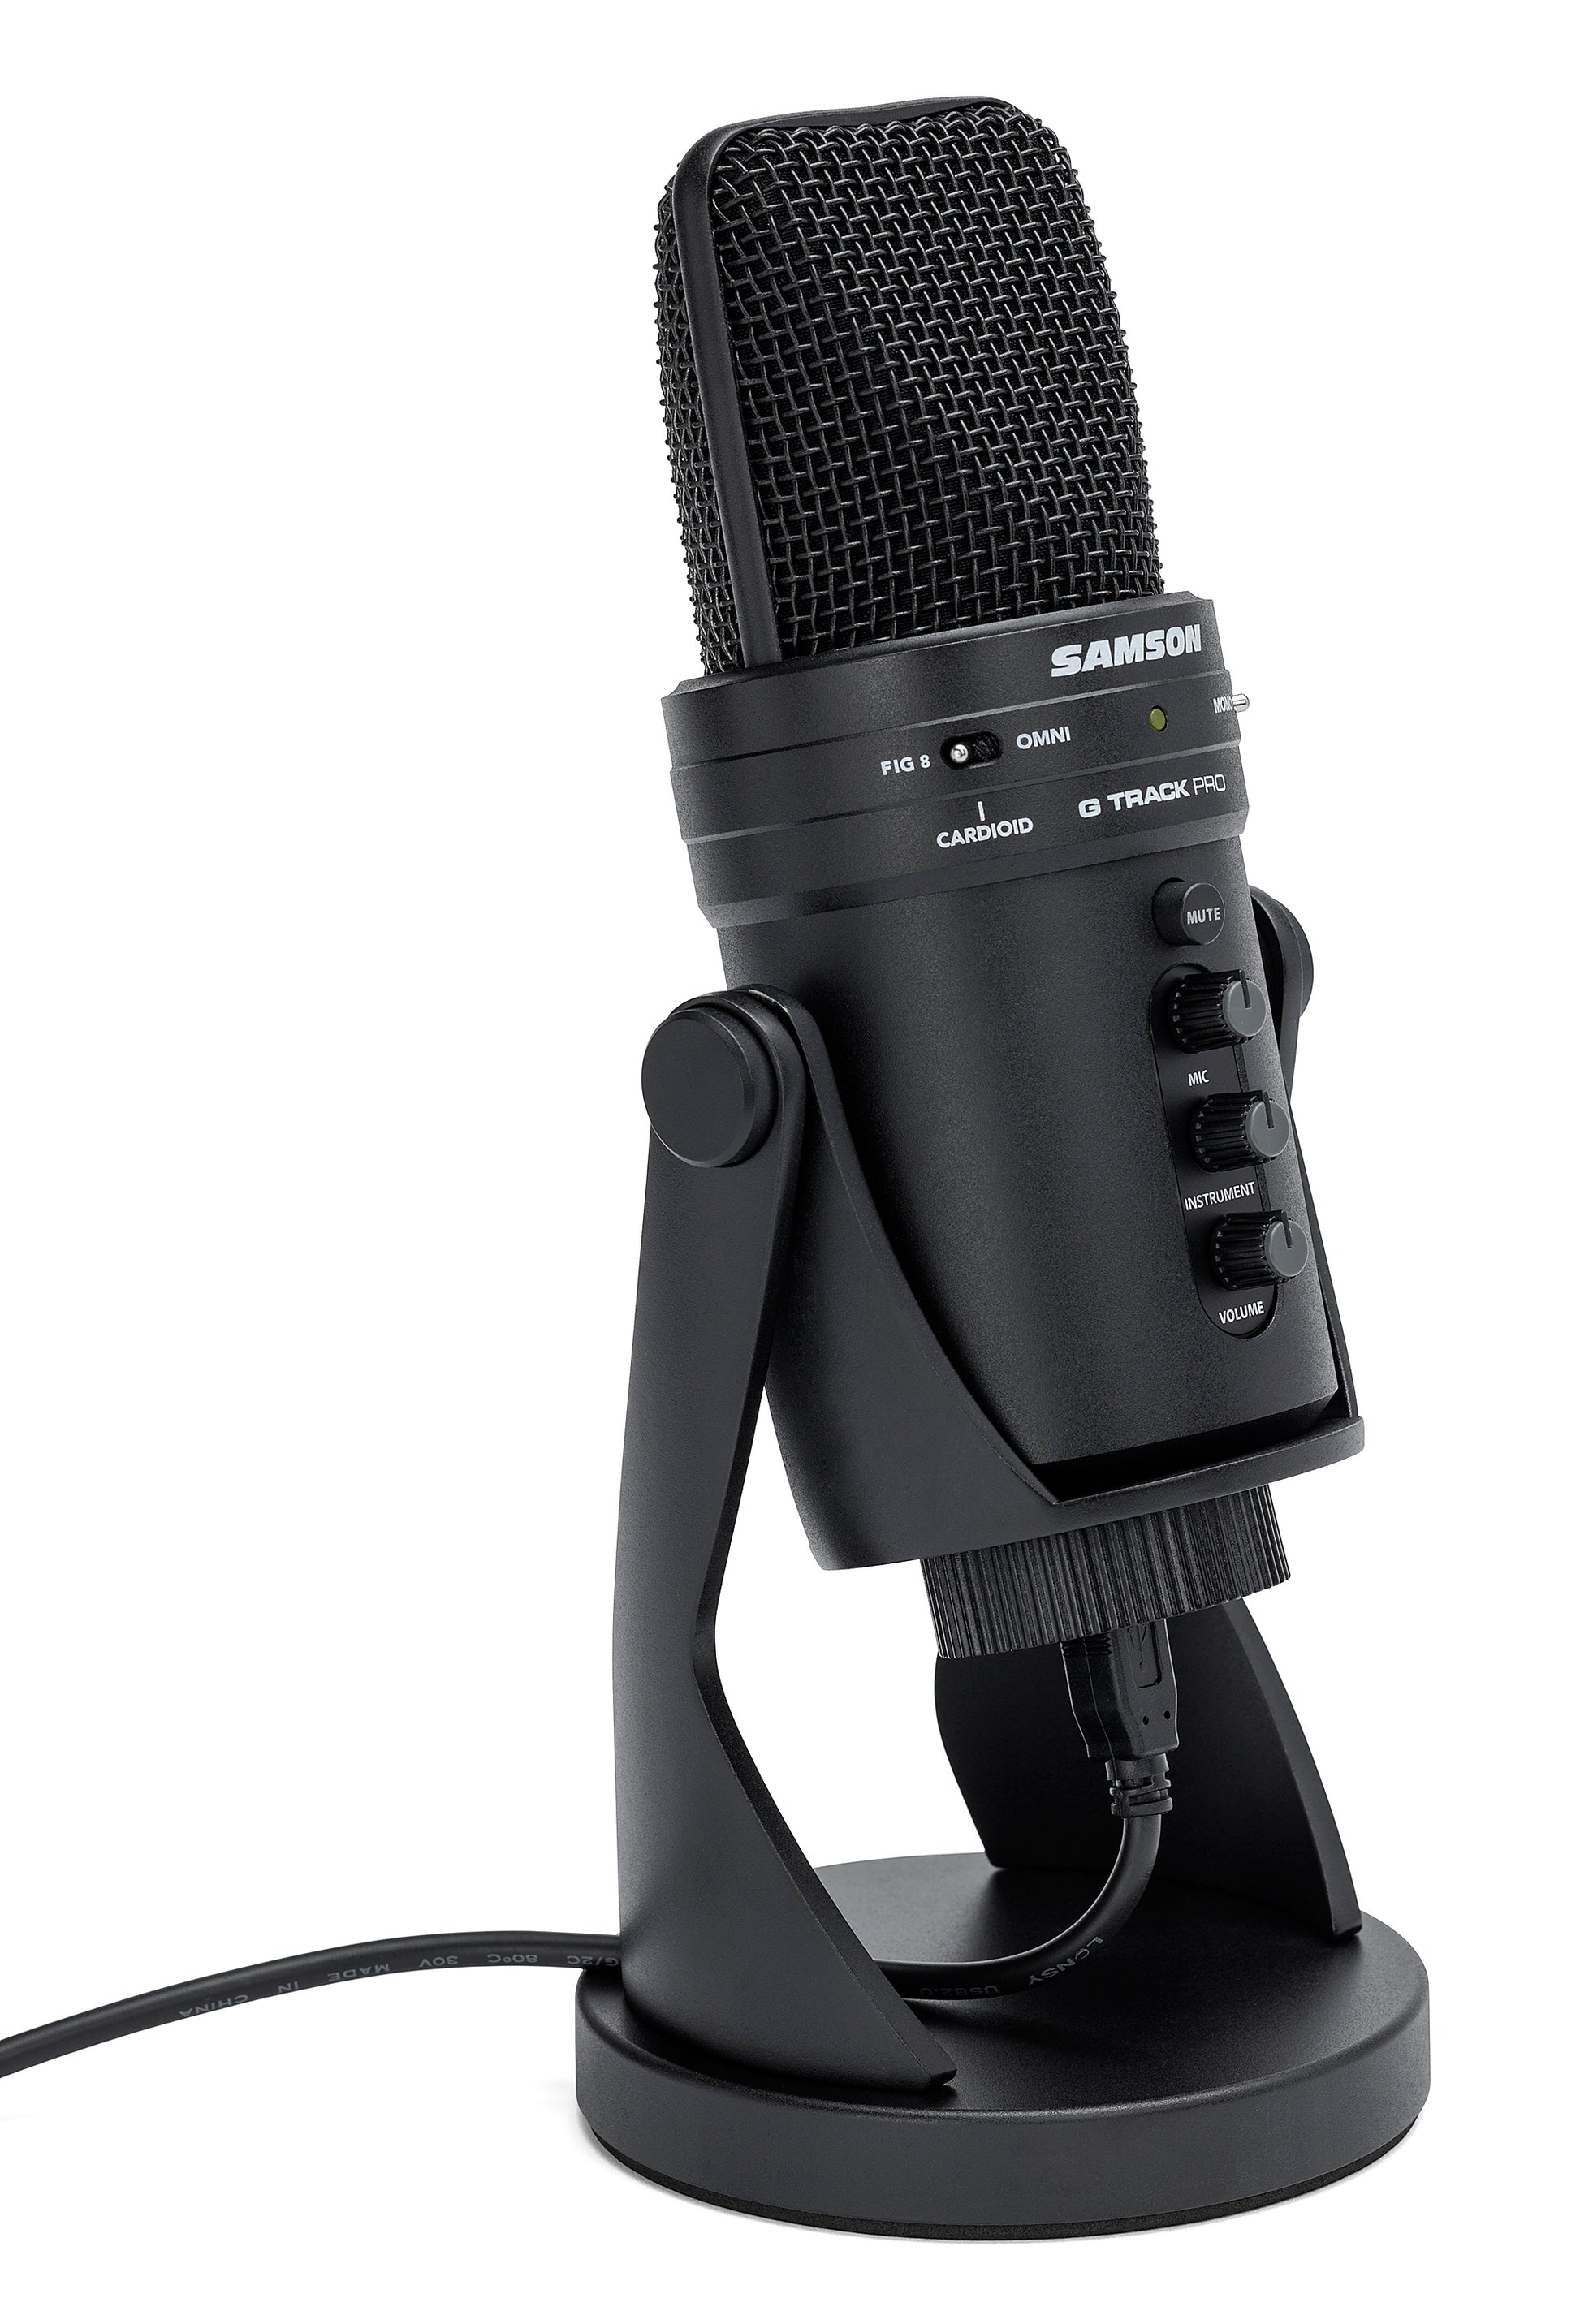 Samson Technology G-Track Pro Professional Microphone with Audio I – JG Superstore